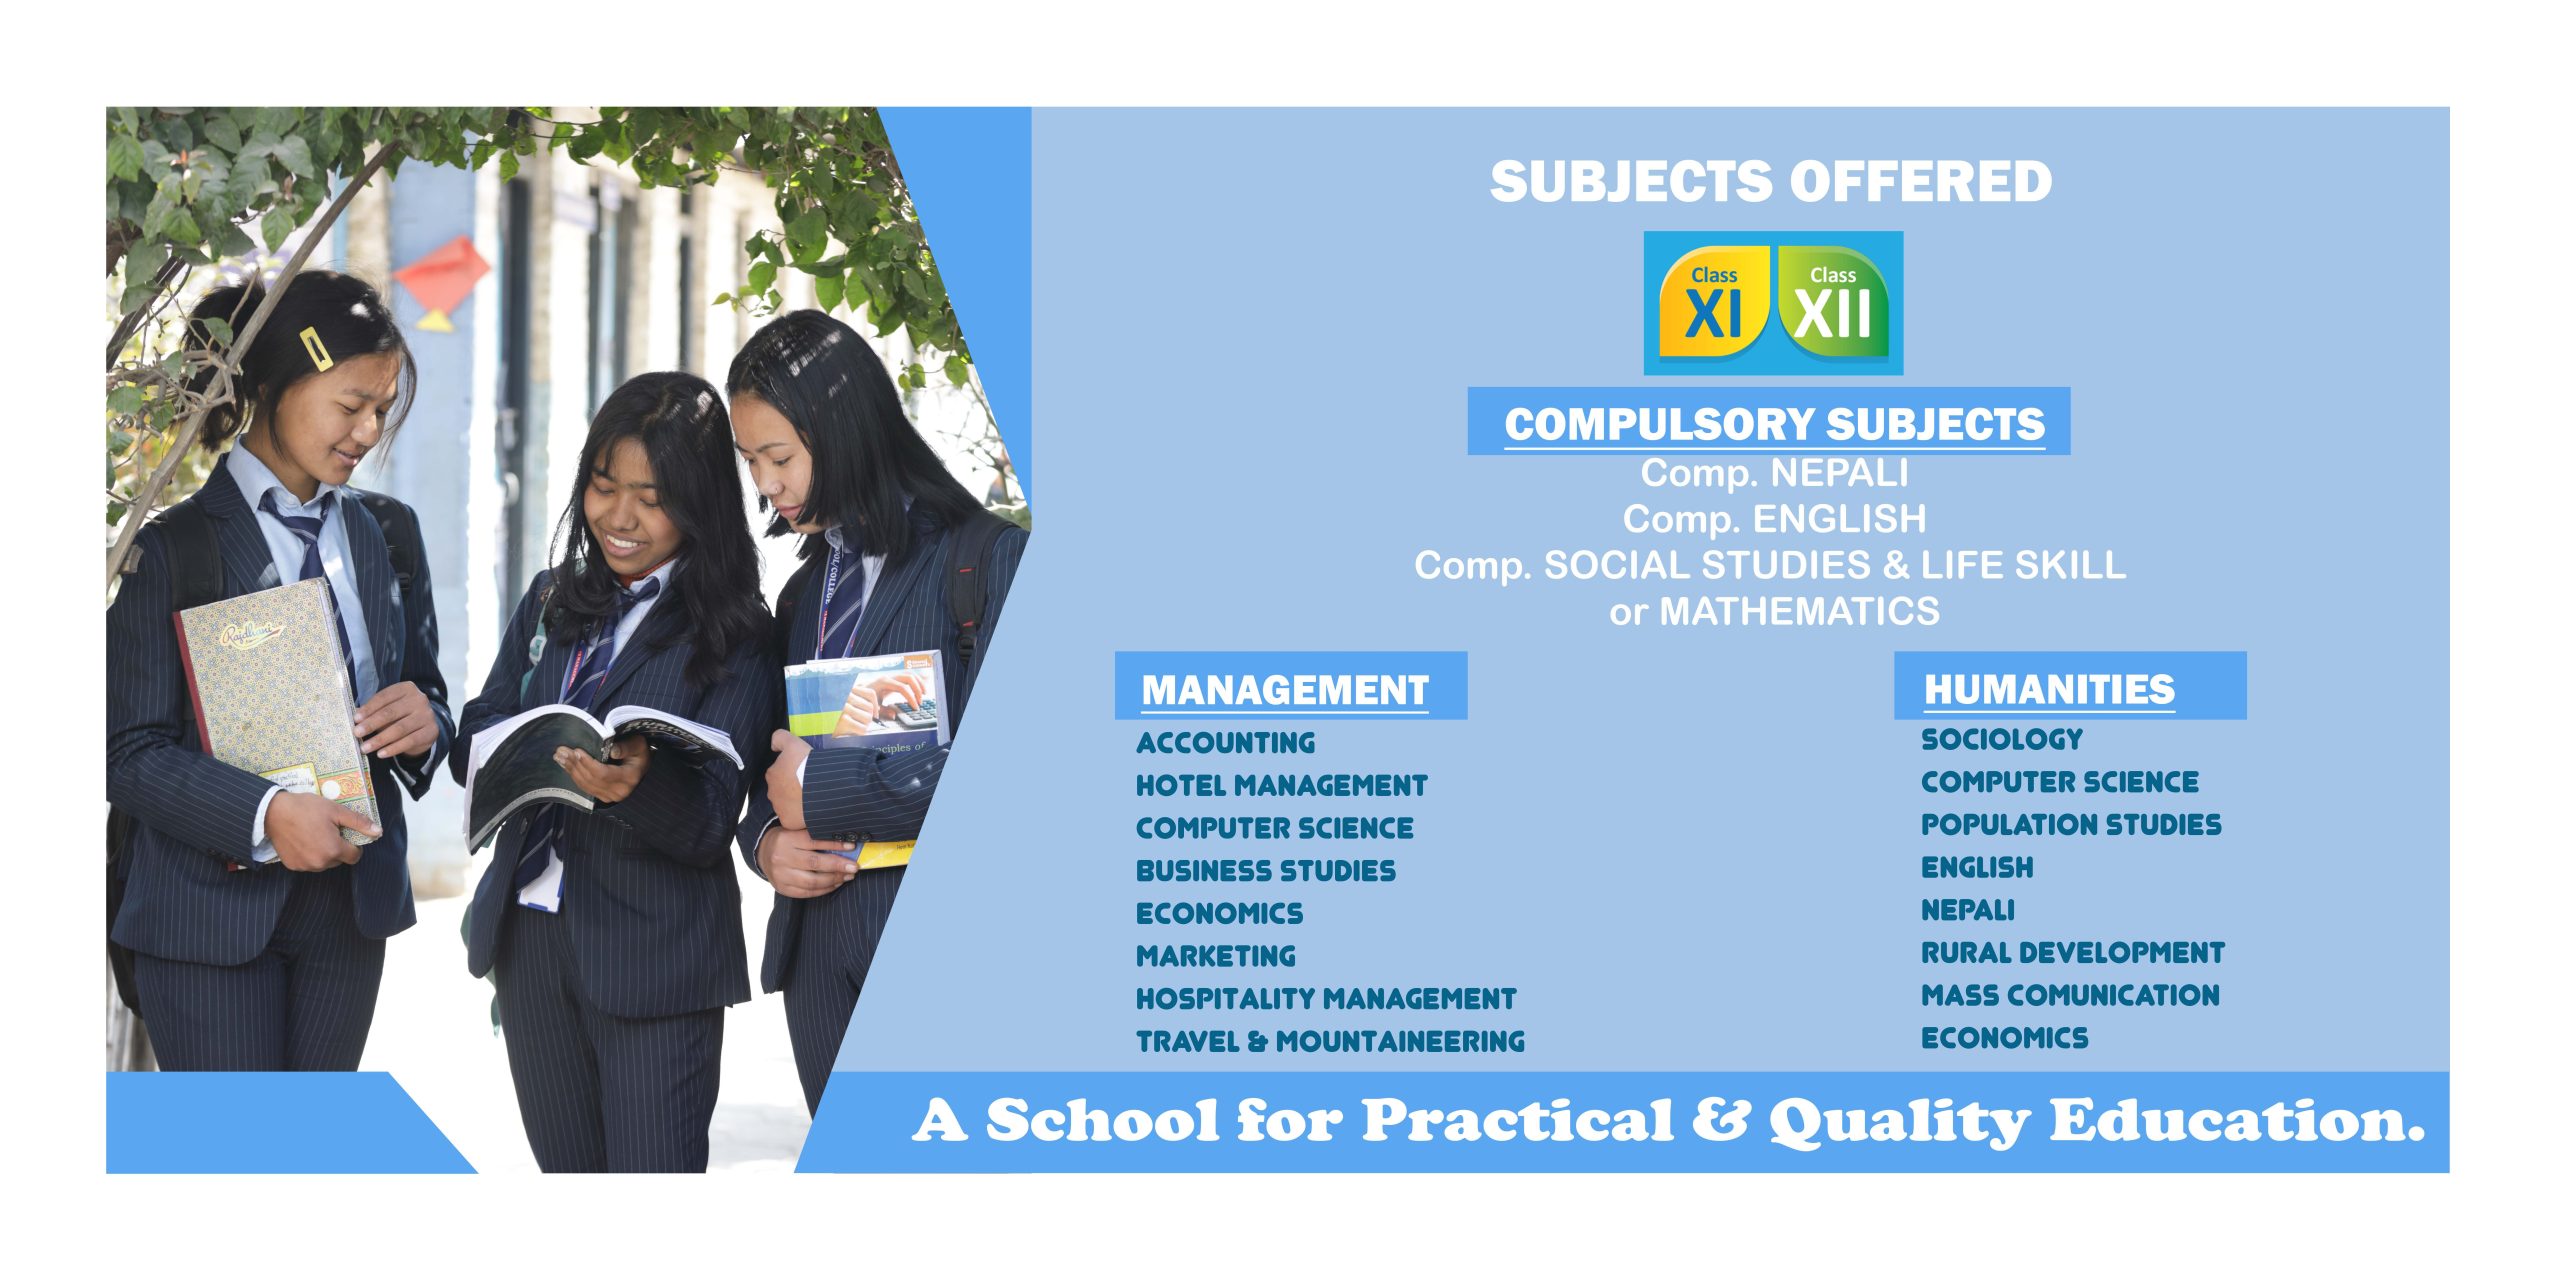 Subject offered in Oxford School / college in +2 program ( Management and Humanities ) Computer Science, Marketing, Business Studies, marketing, accounting, economics, Hotel Management, hospitality management, sociology, mass communication, English, Nepali, Travel and Mountaineering , Population studies